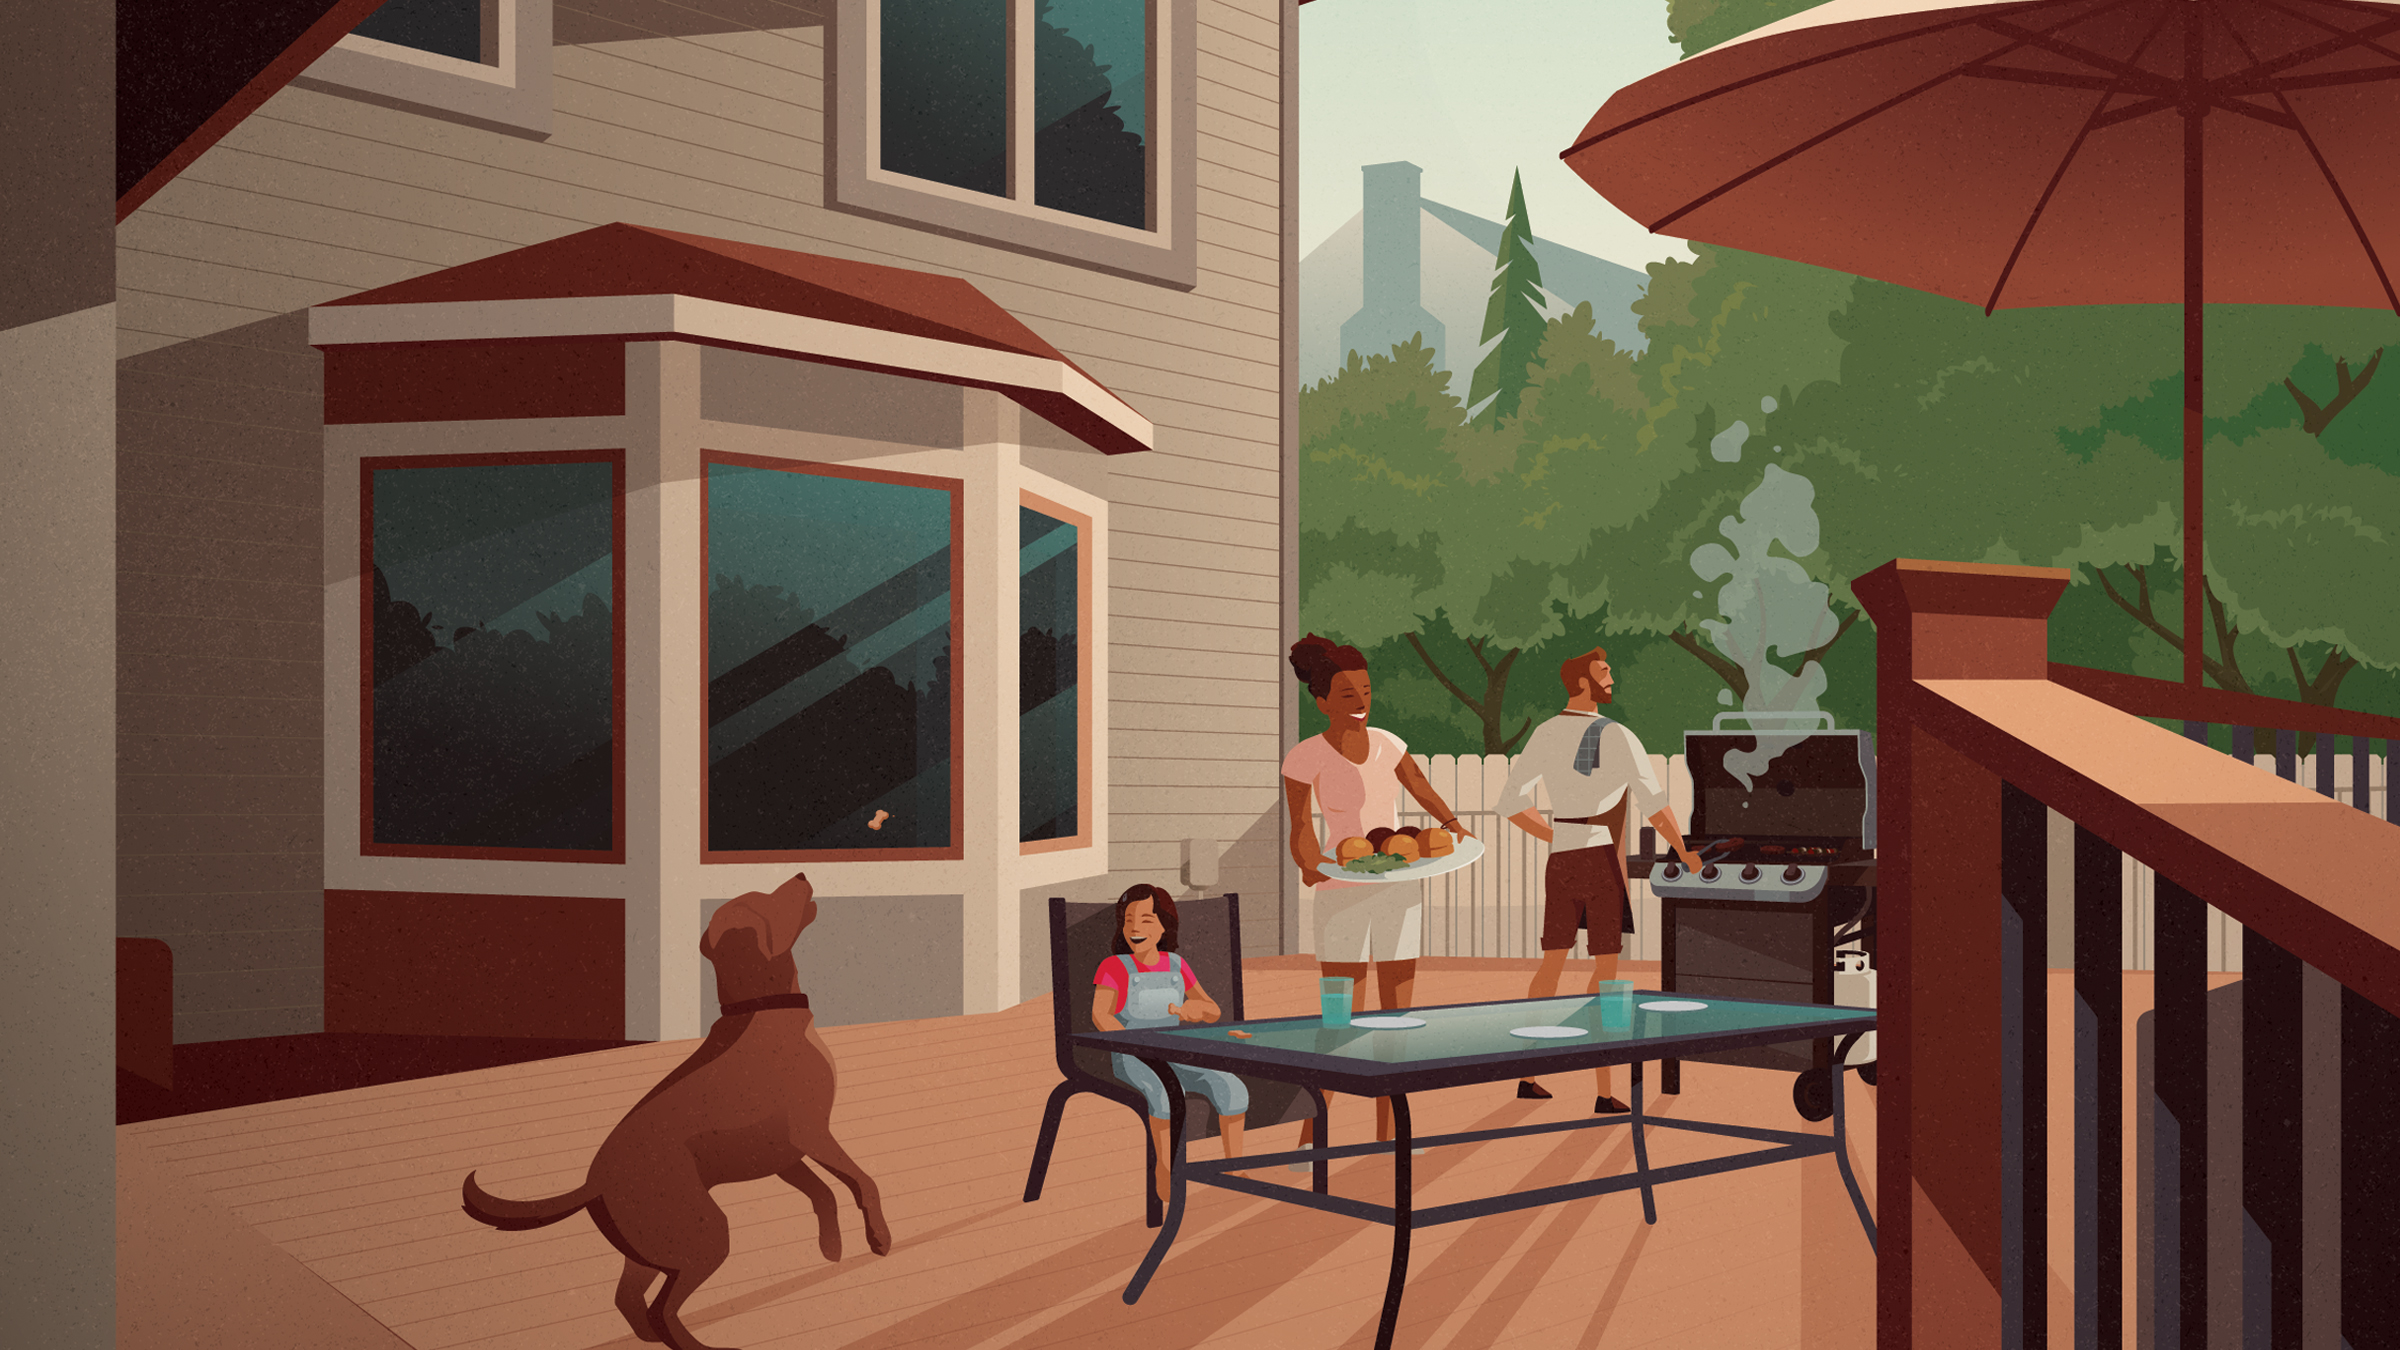 Illustration of a family backyard barbecue